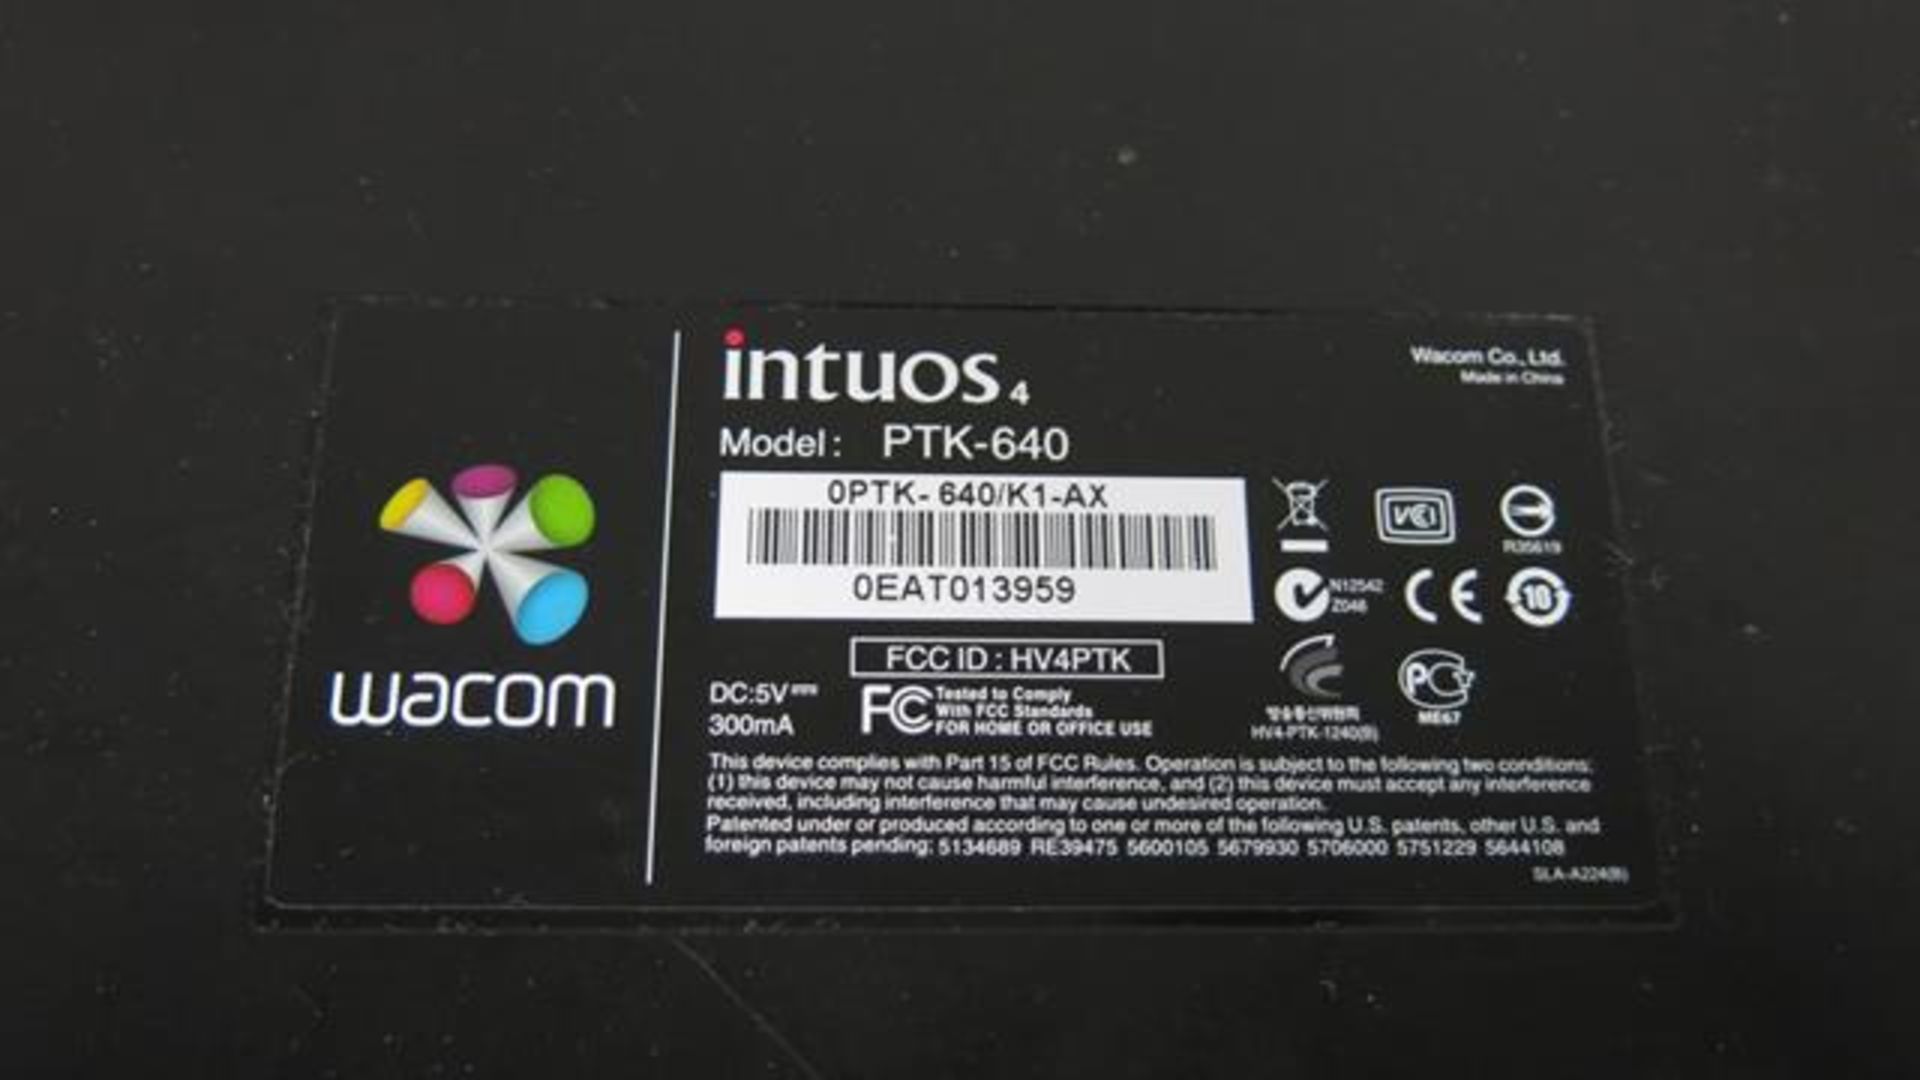 WACOM, PTK-640, MEDIUM, USB WIRED, GRAPHICS TABLET (UNIT NOT FUNCTIONING) (TAG#260) - Image 2 of 2